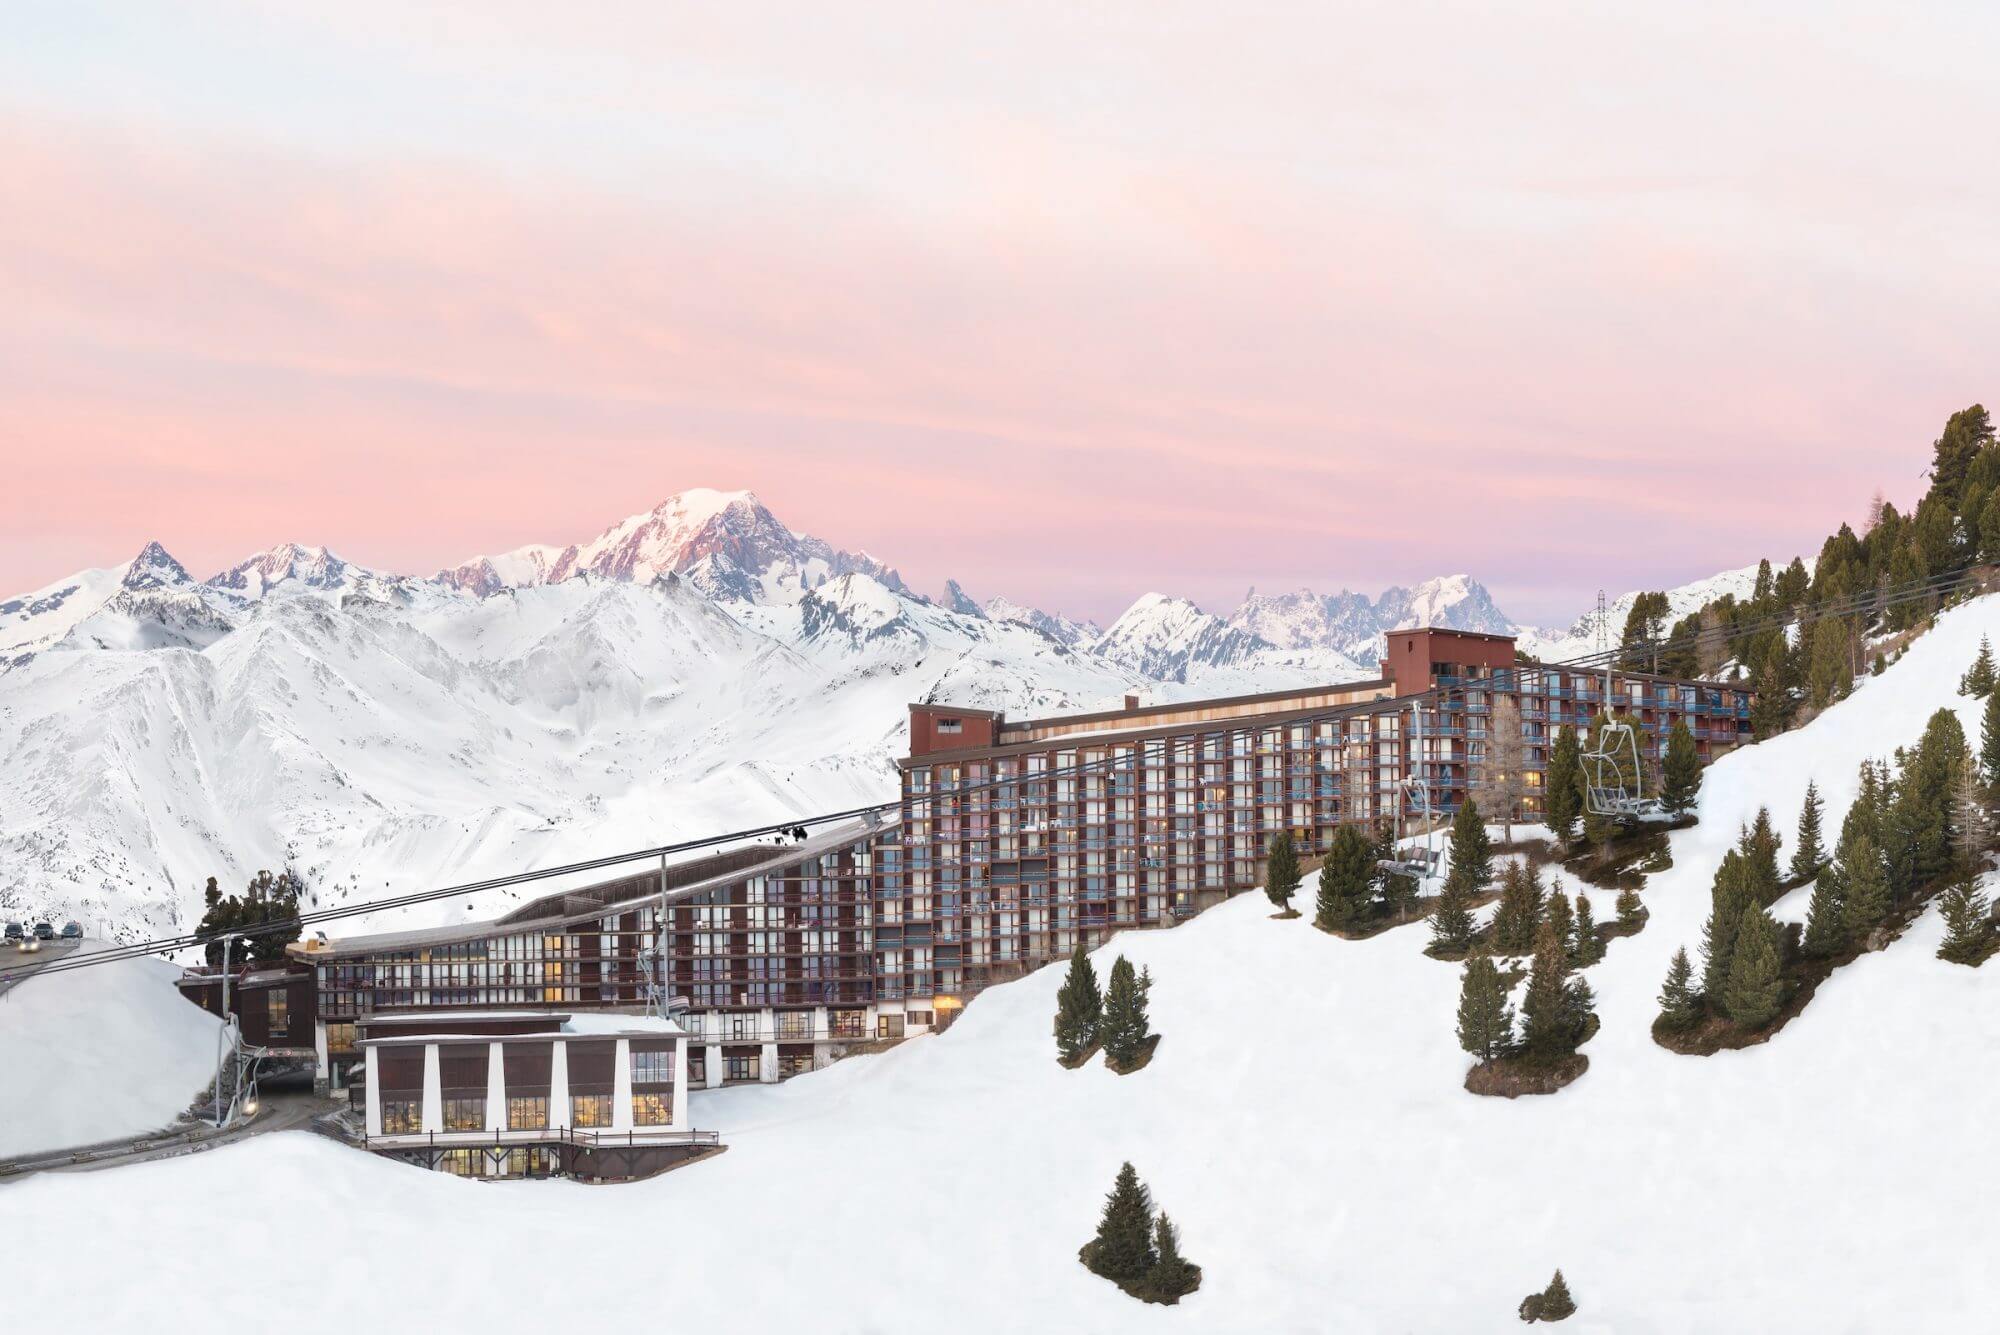 For The Complete, Stress-Free Ski Holiday, It’s Got To Be Club Med